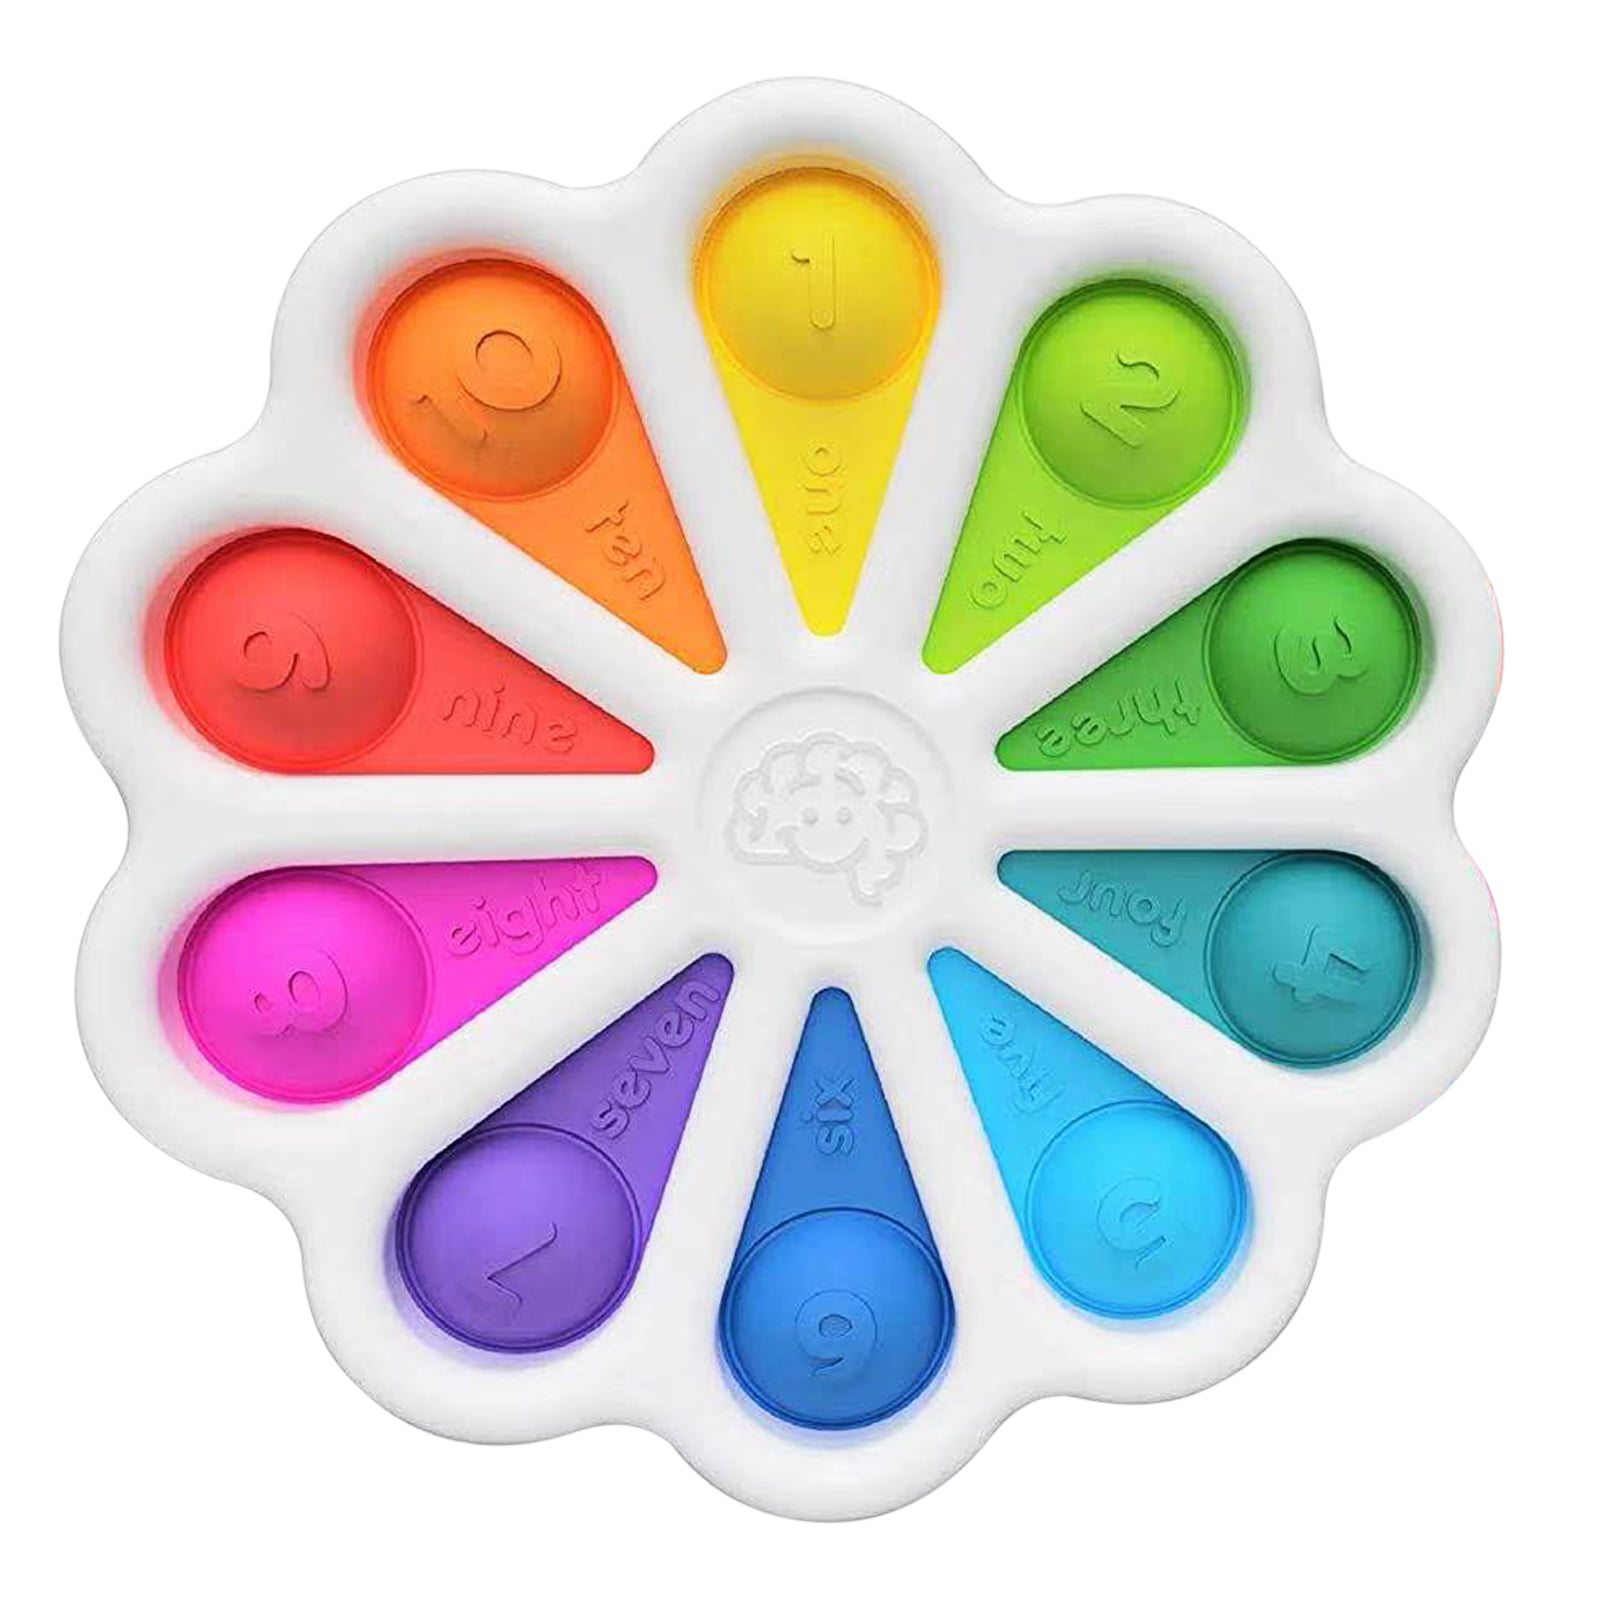 Fidget Toys Push Bubble Keychain Sensory Therapy Toys for Home Office Classroom Two/Three Keys Mini Simple Dimple Sensory Stress Relief Anti-Anxiety Autism Hand Popular Toys for Kids Teen Adult 